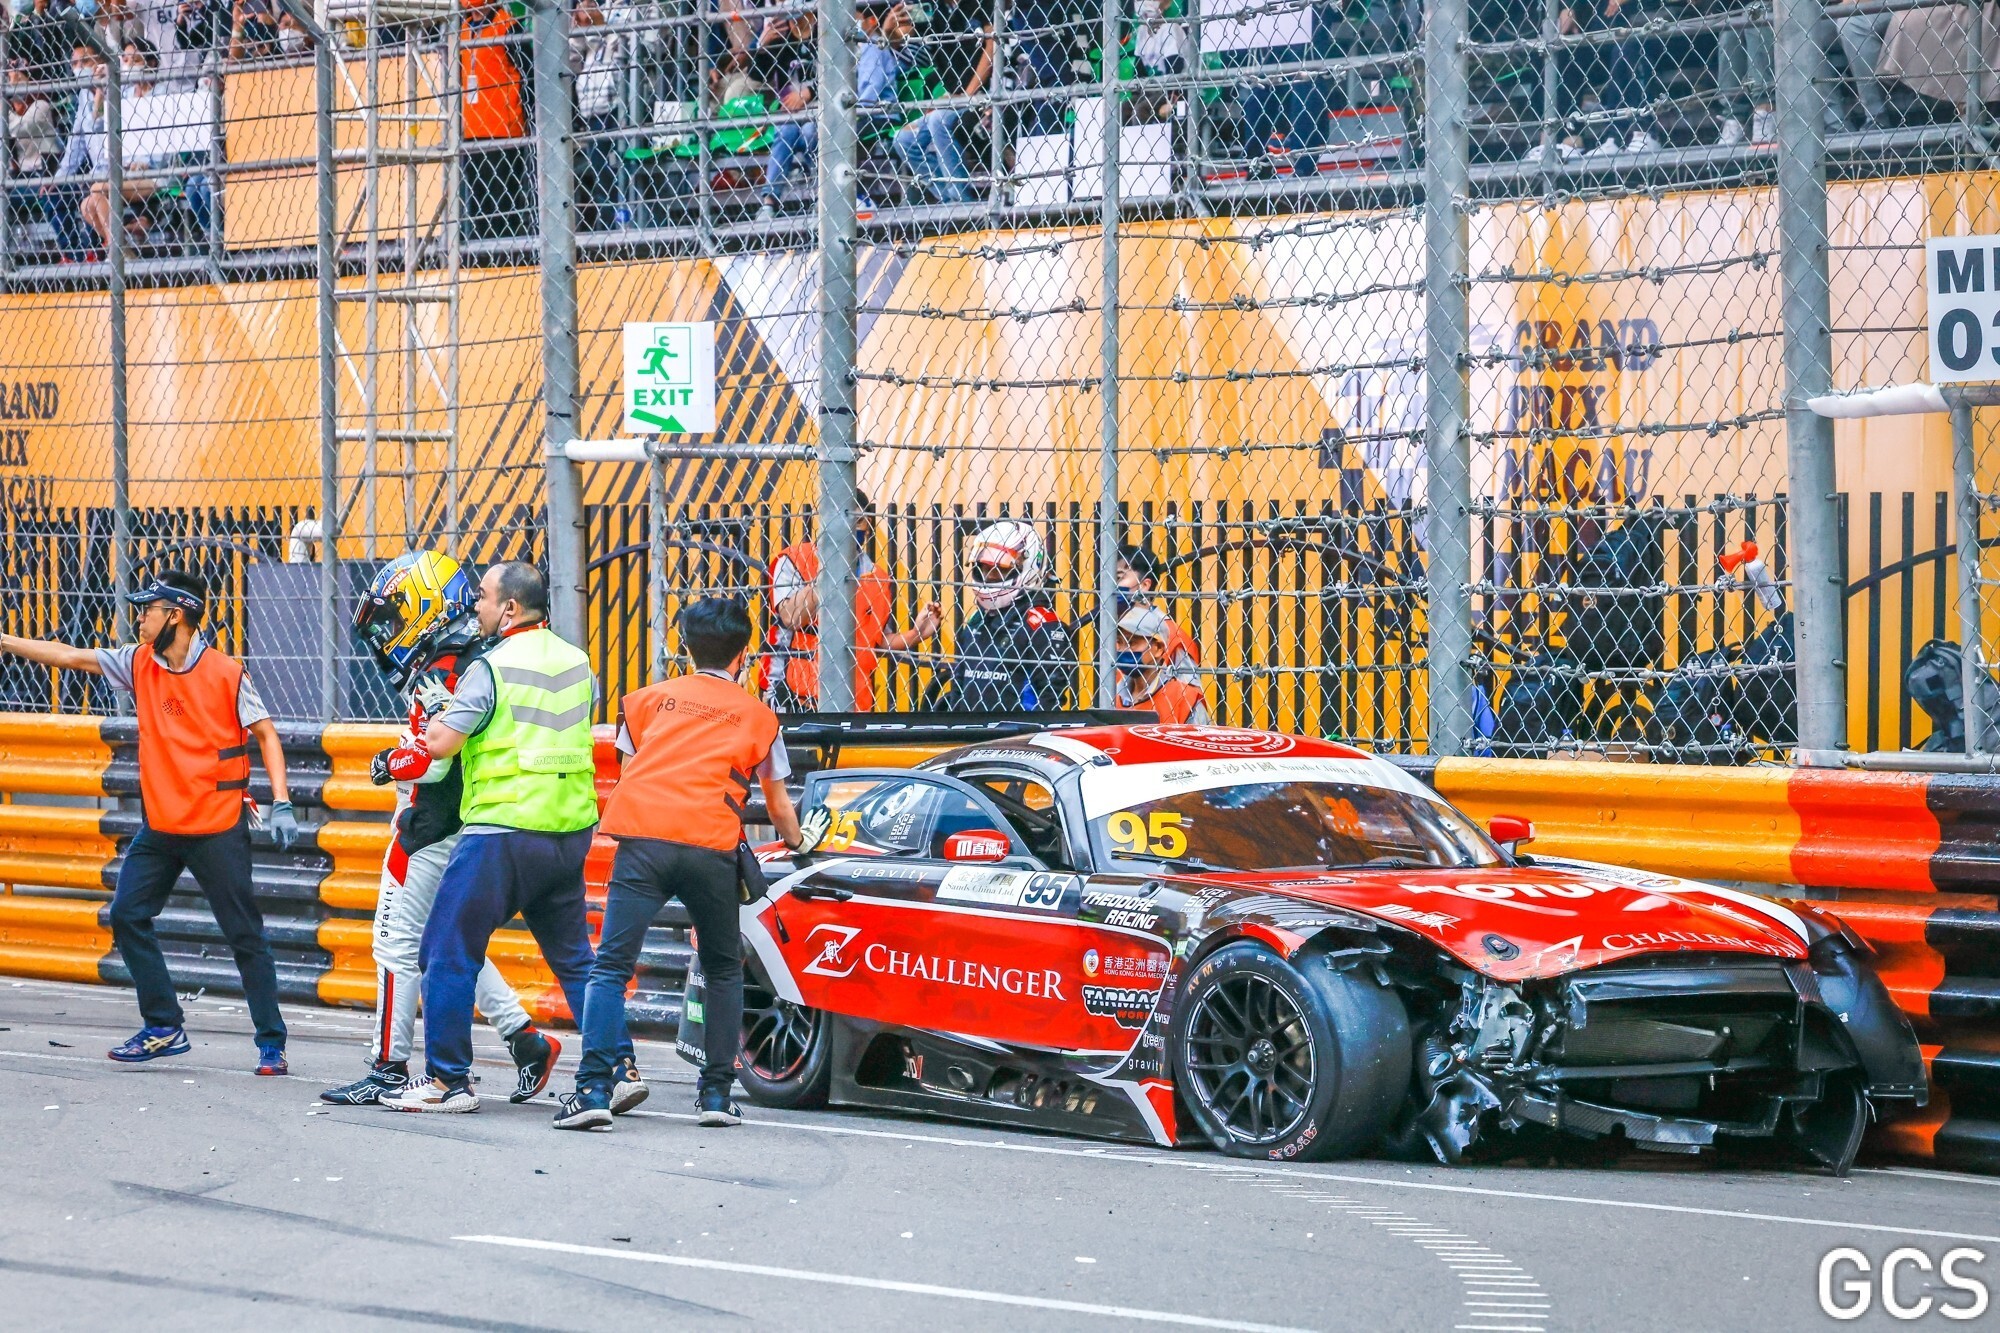 Hong Kong driver Darryl O'Young is taken to the medical centre after he crashes at the Macau Grand Prix GT Cup round one event. Photo: Macau Grand Prix